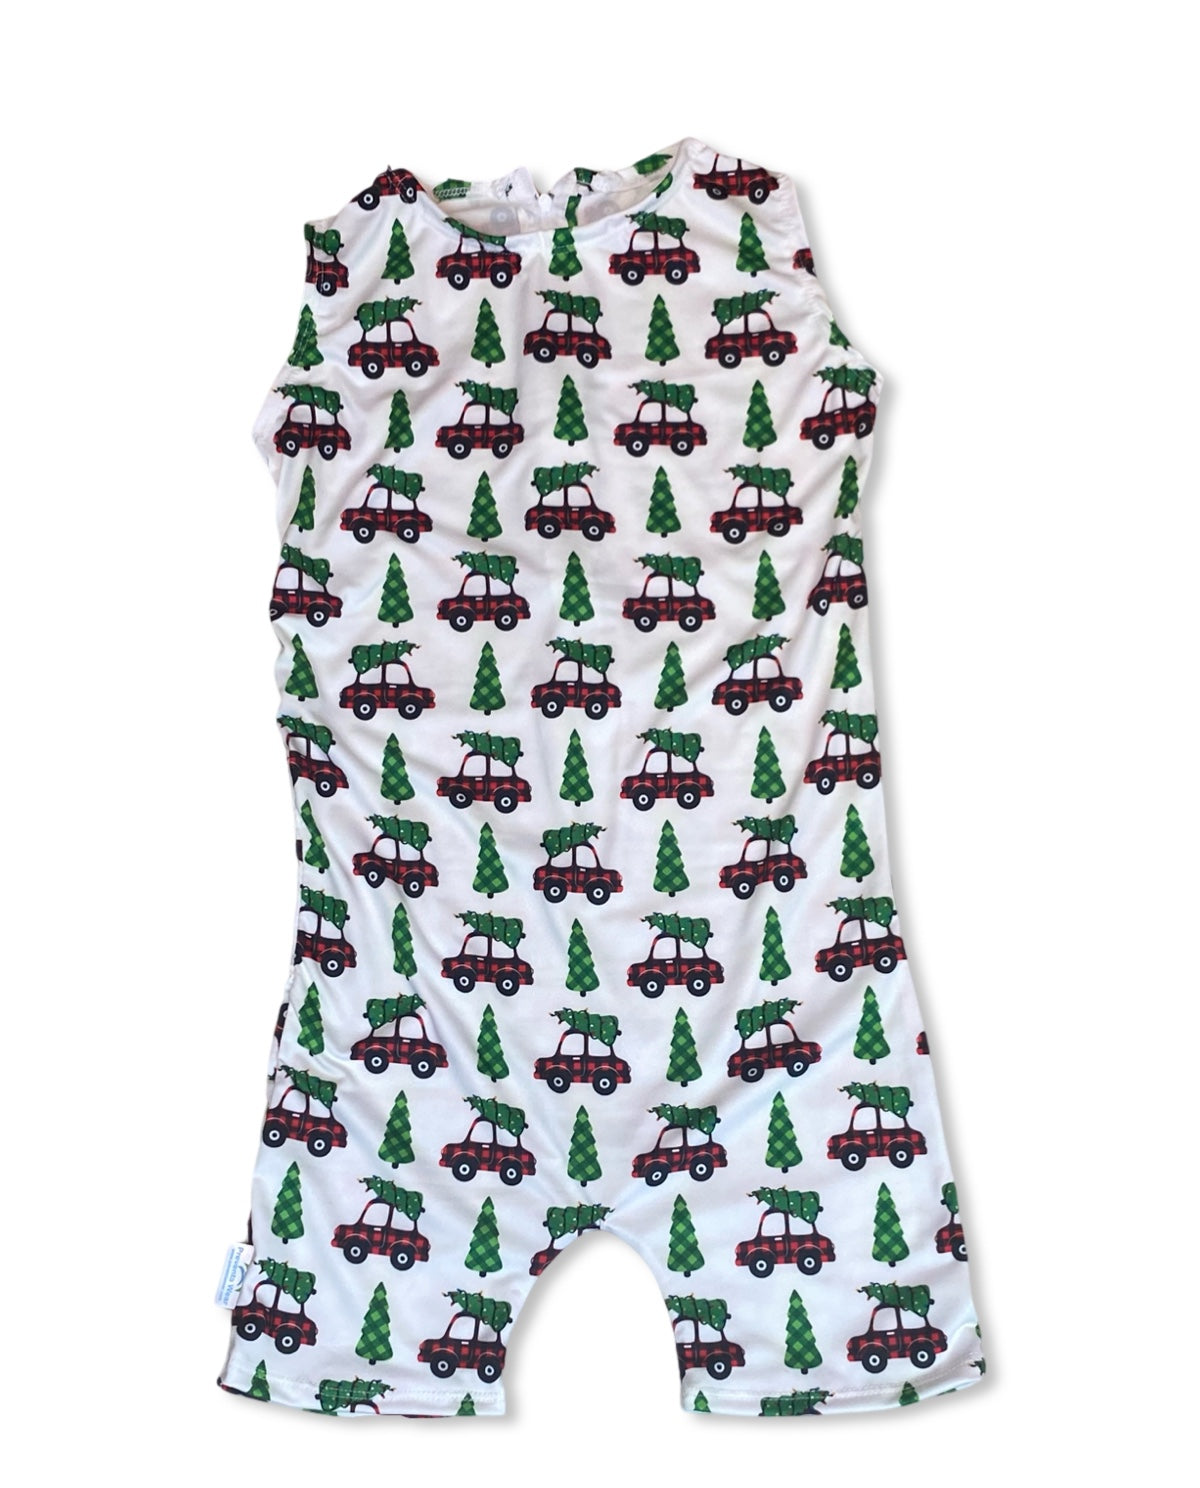 Festive baby romper with zip back, featuring Christmas tree print